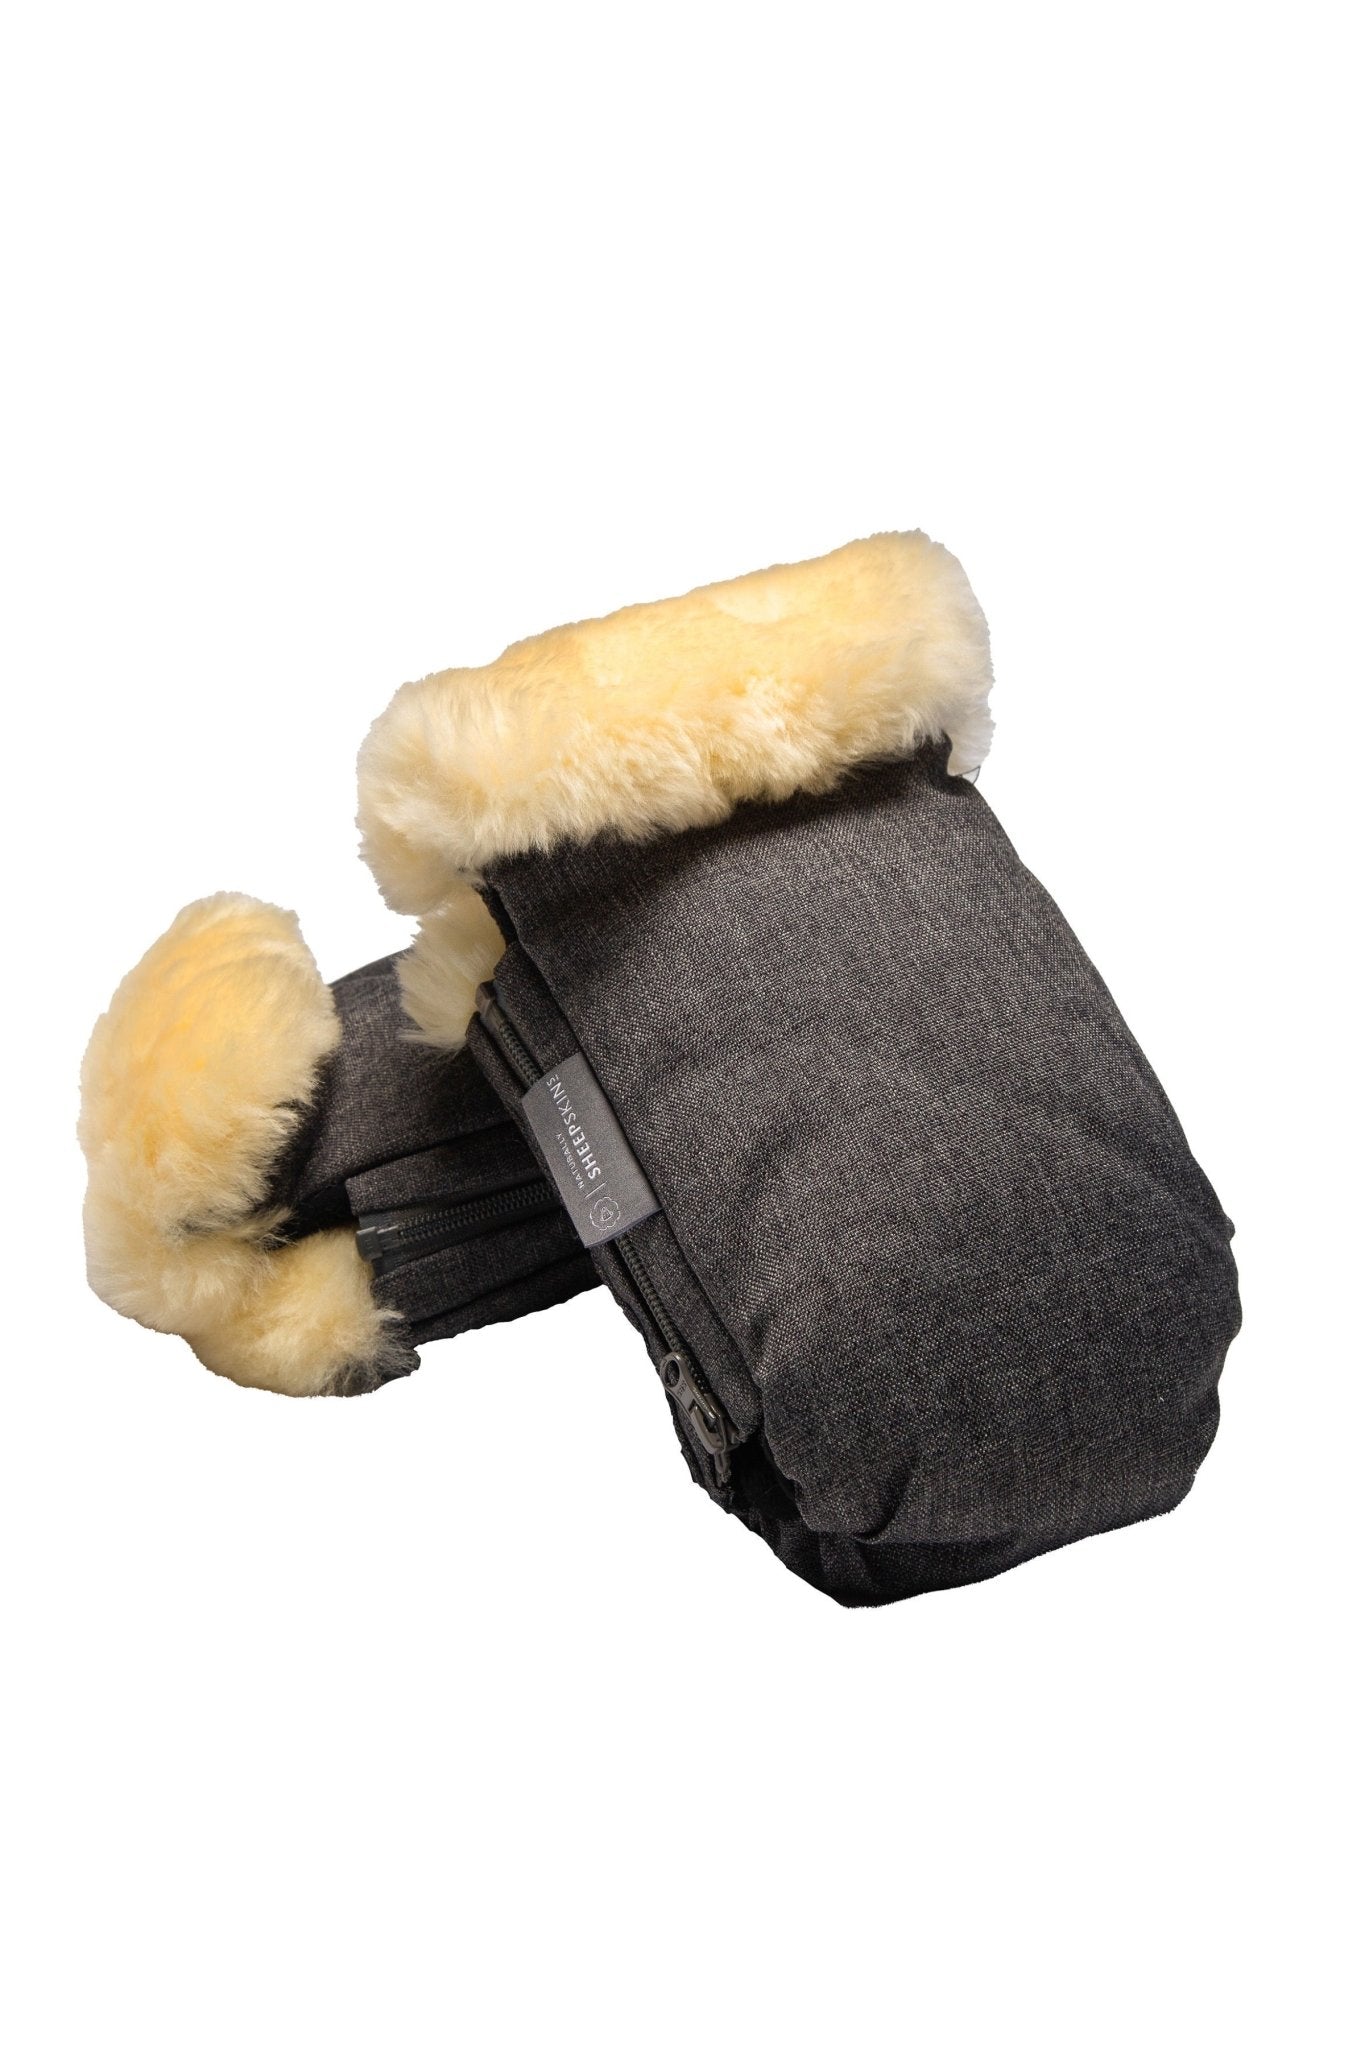 Deluxe Stroller Hand Mittens Grey - Naturally Sheepskins at angle